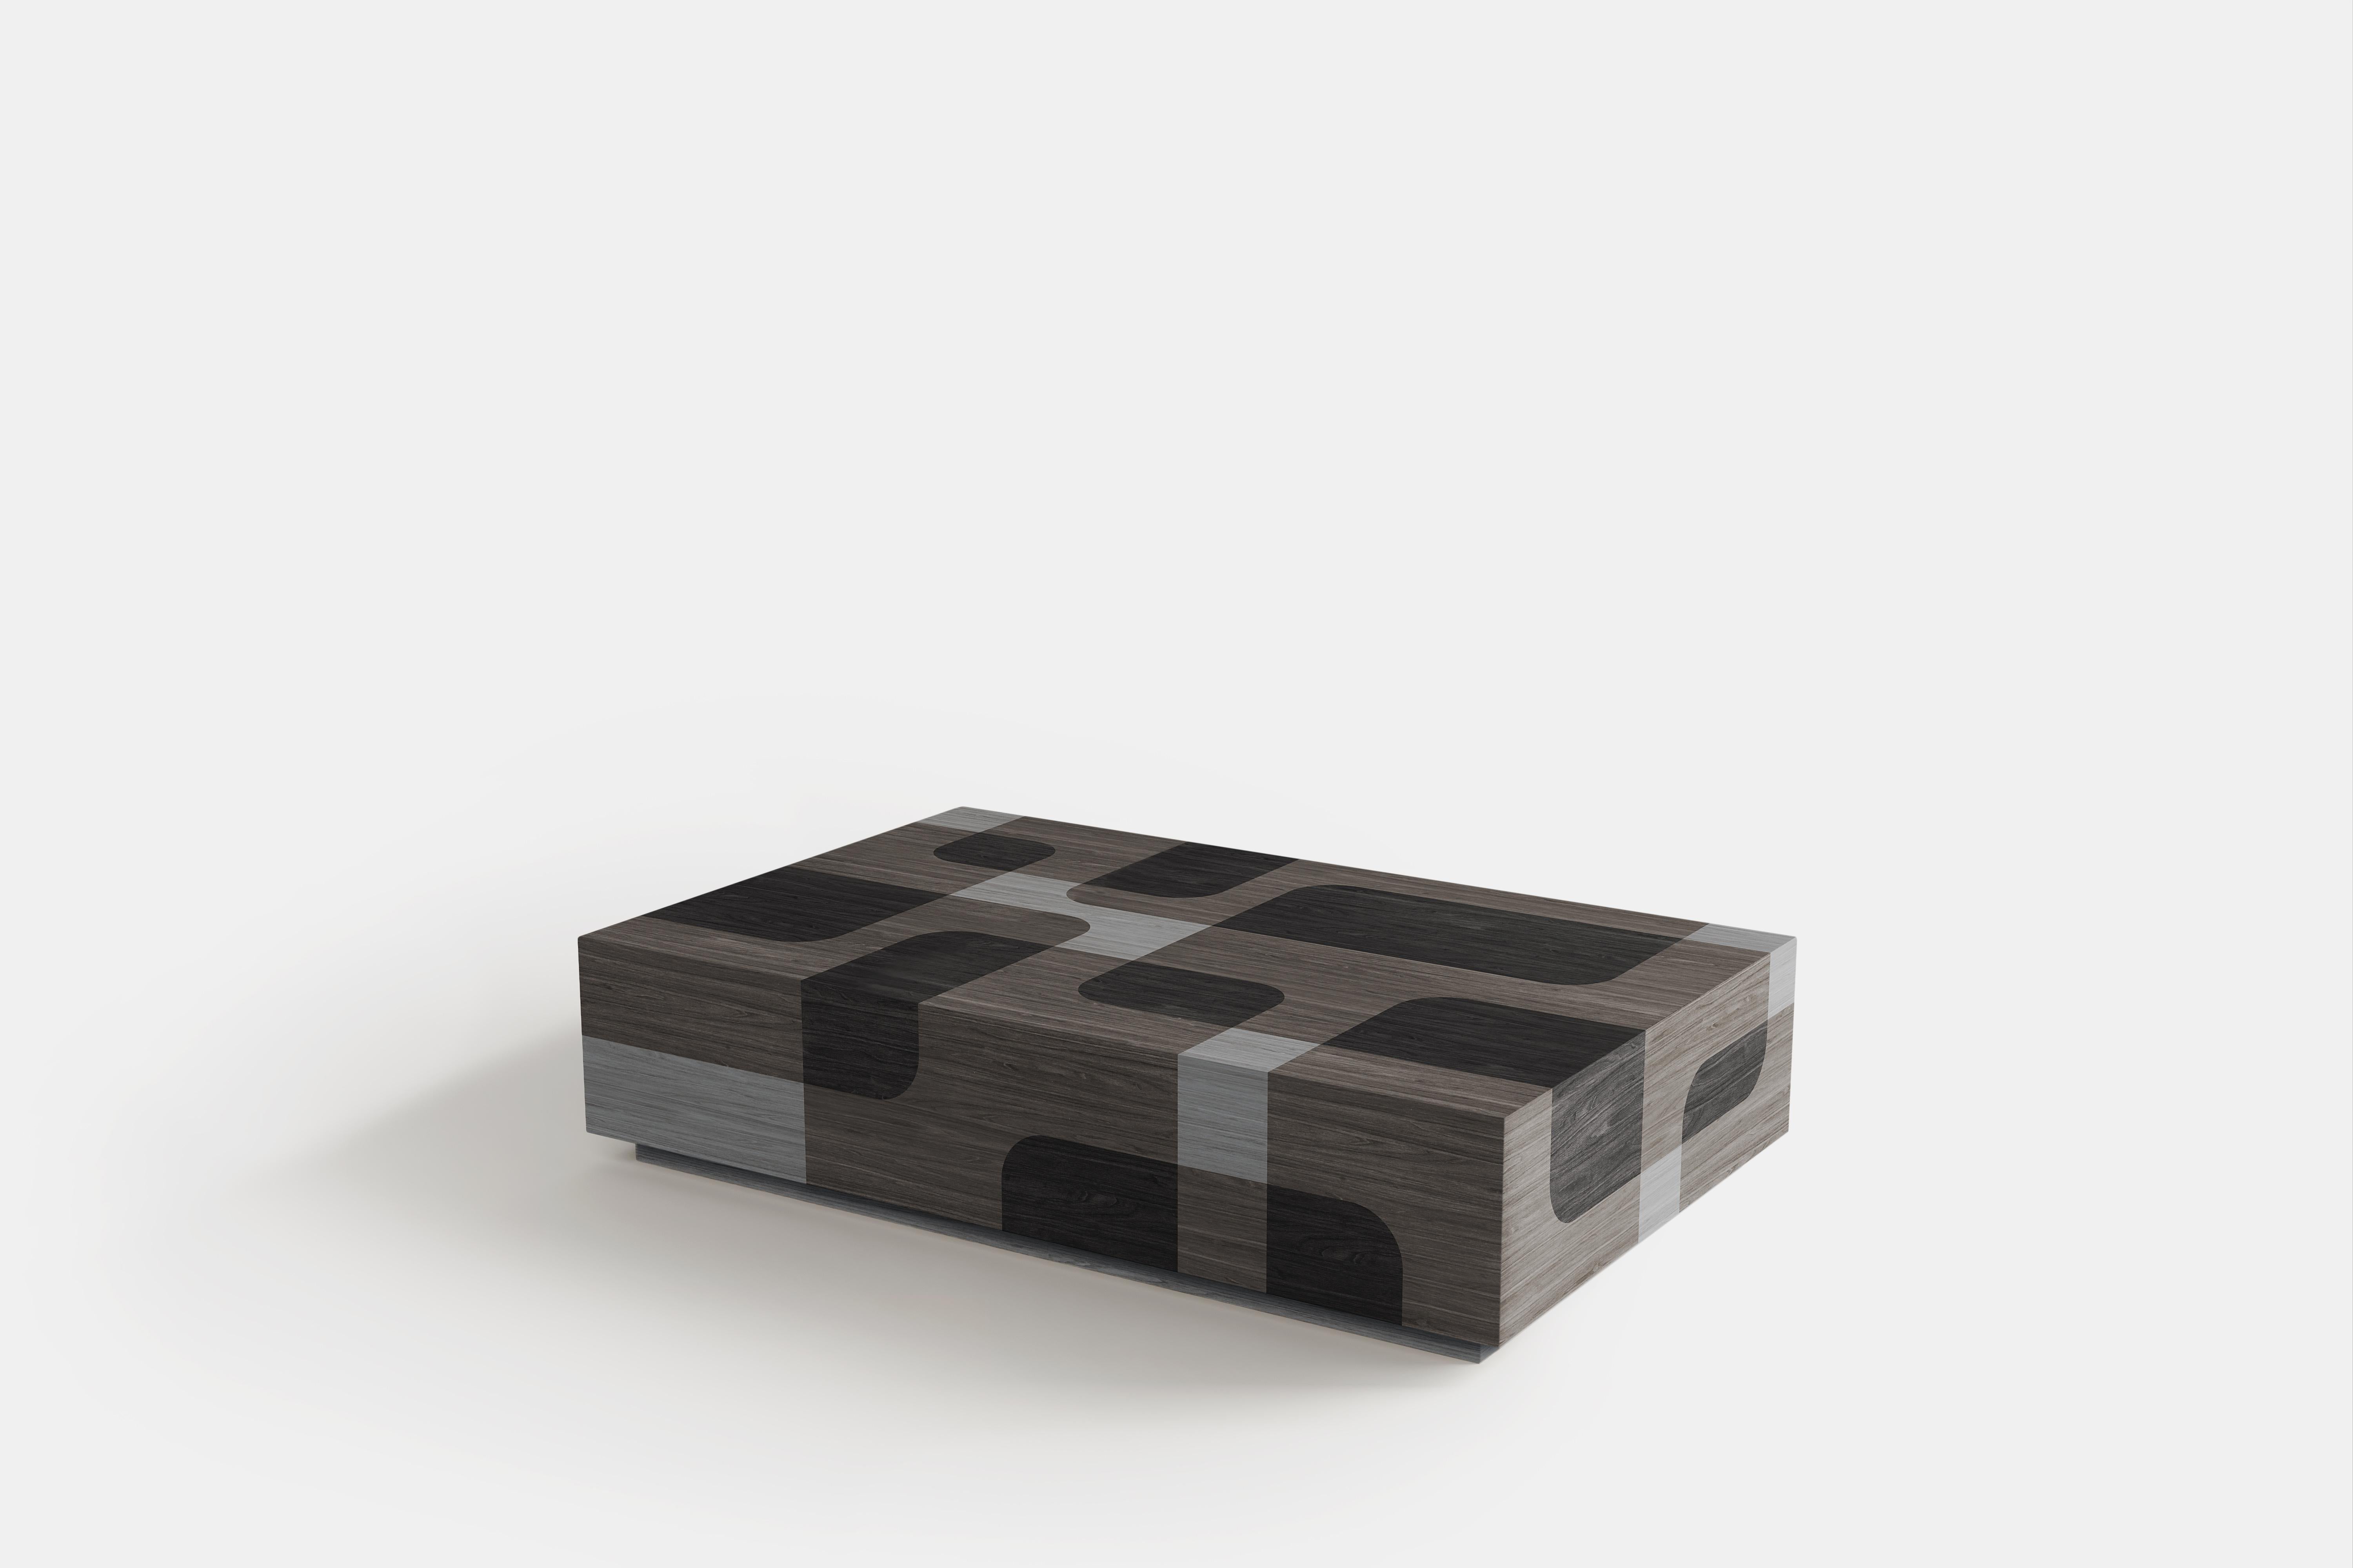 2 Bodega Side Tables and 1 Coffee Table in Black Wood Marquetry by Joel Escalona (Marketerie) im Angebot